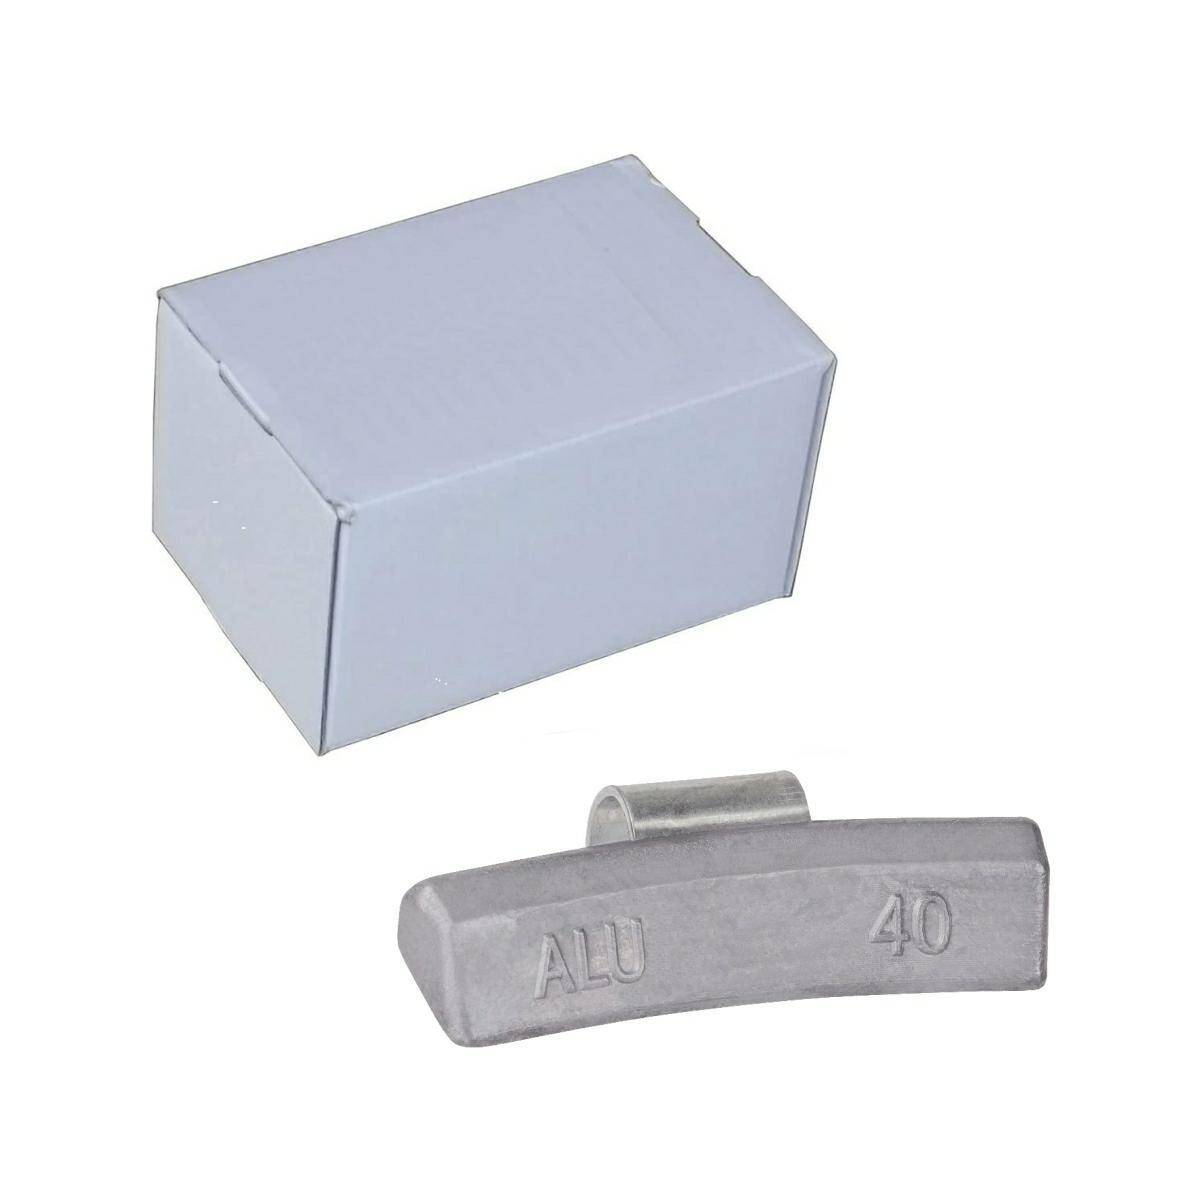 Lead stud weight ALU AT Type 608 55g (Pb) - pack of 50 (H608-55AT)